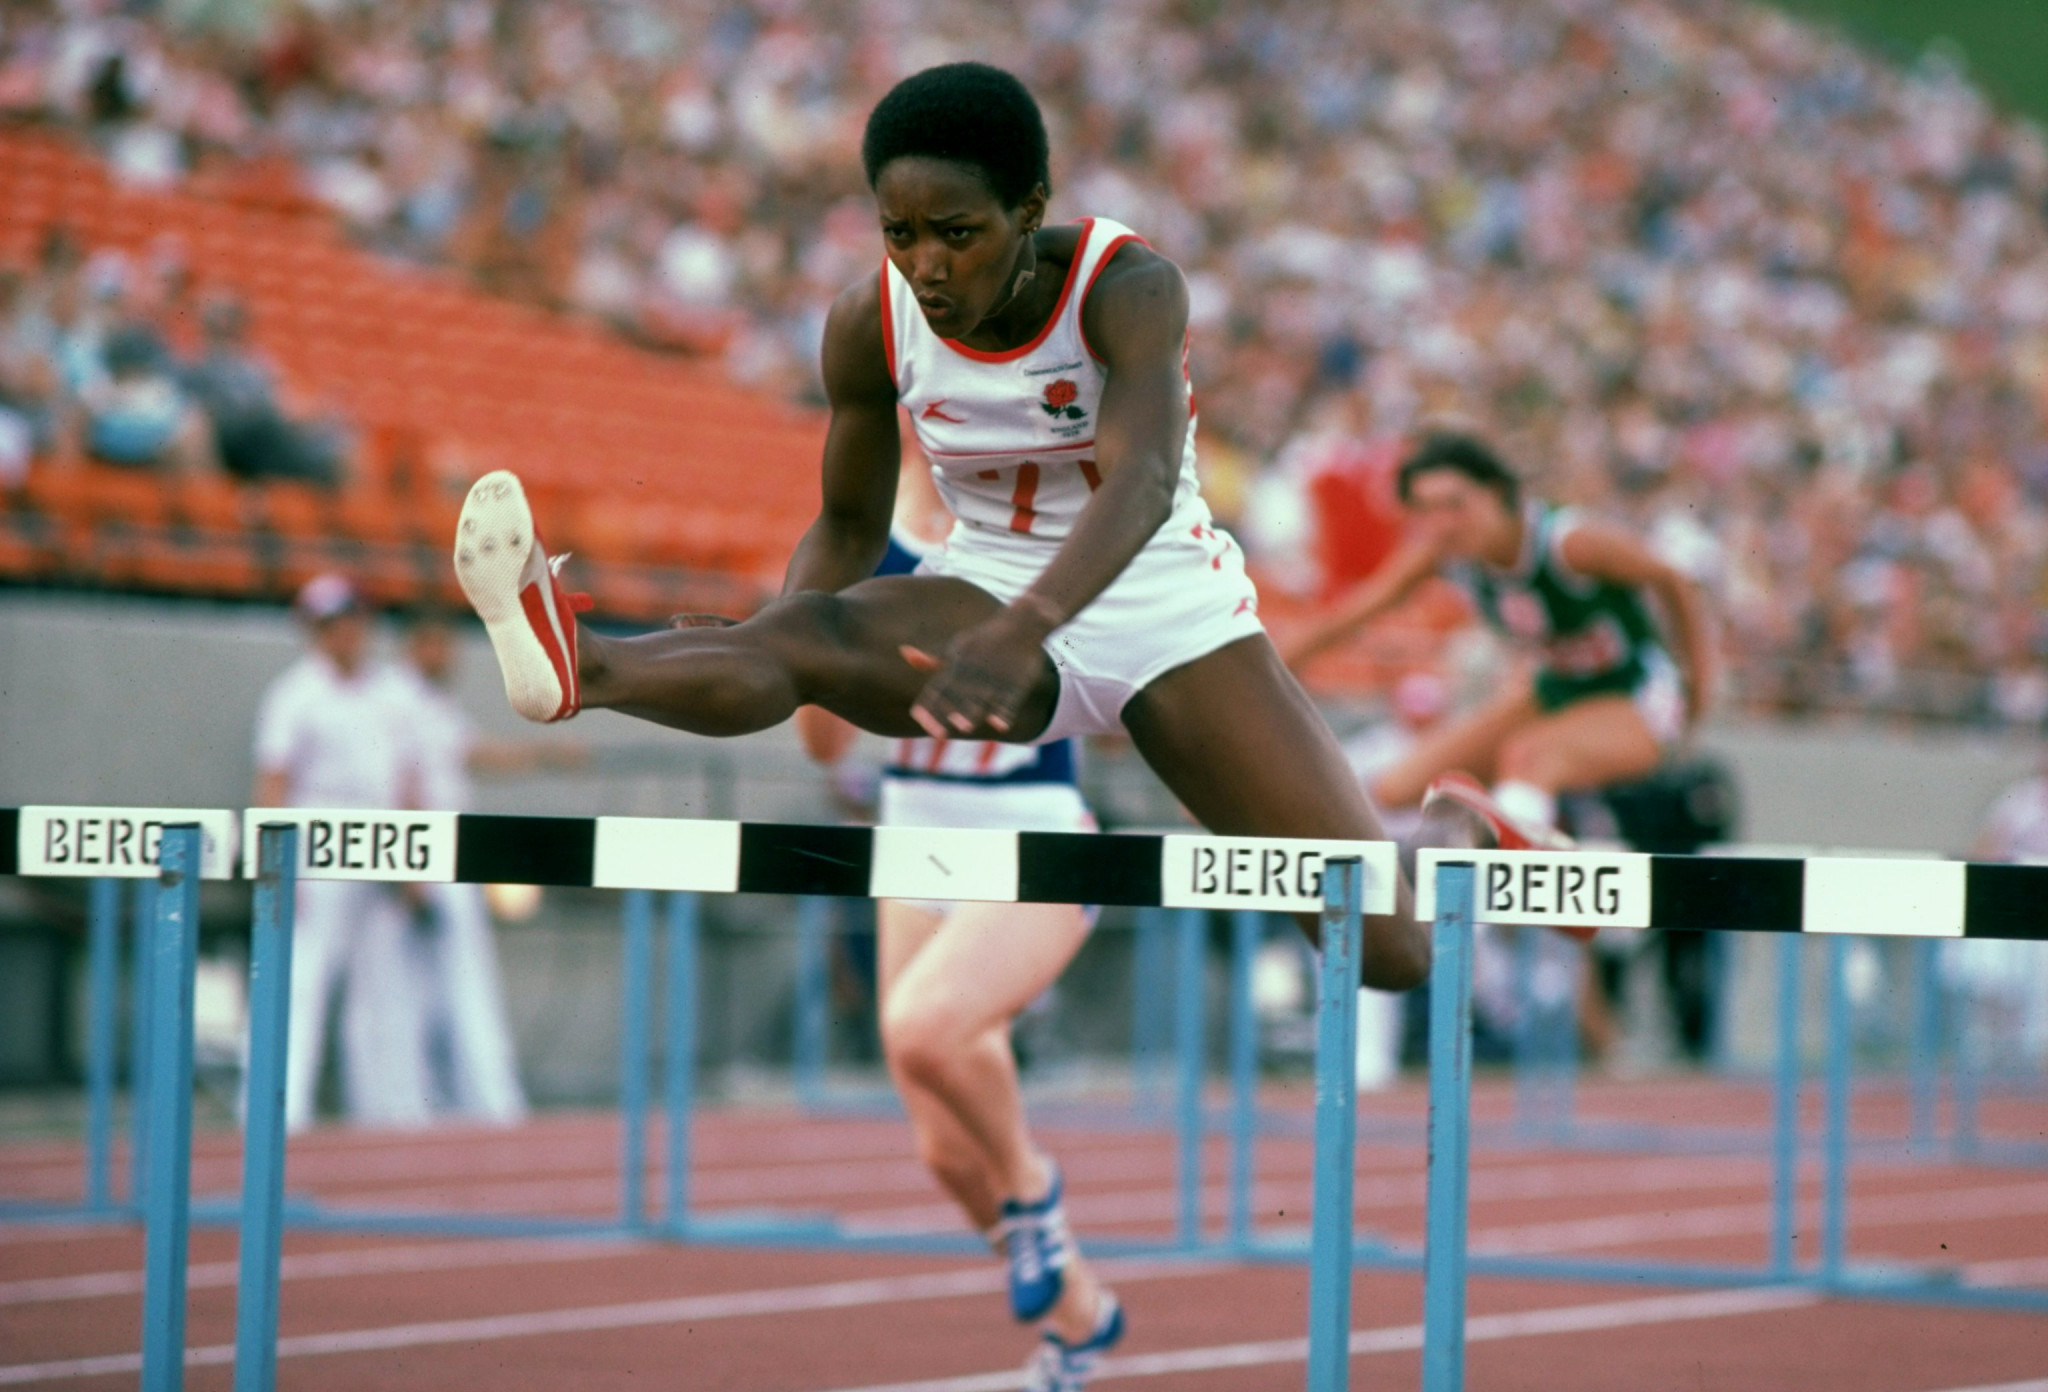 Lorna Boothe won a Commonwealth Games gold medal in the 100m hurdles at Edmonton in 1978 ©Getty Images